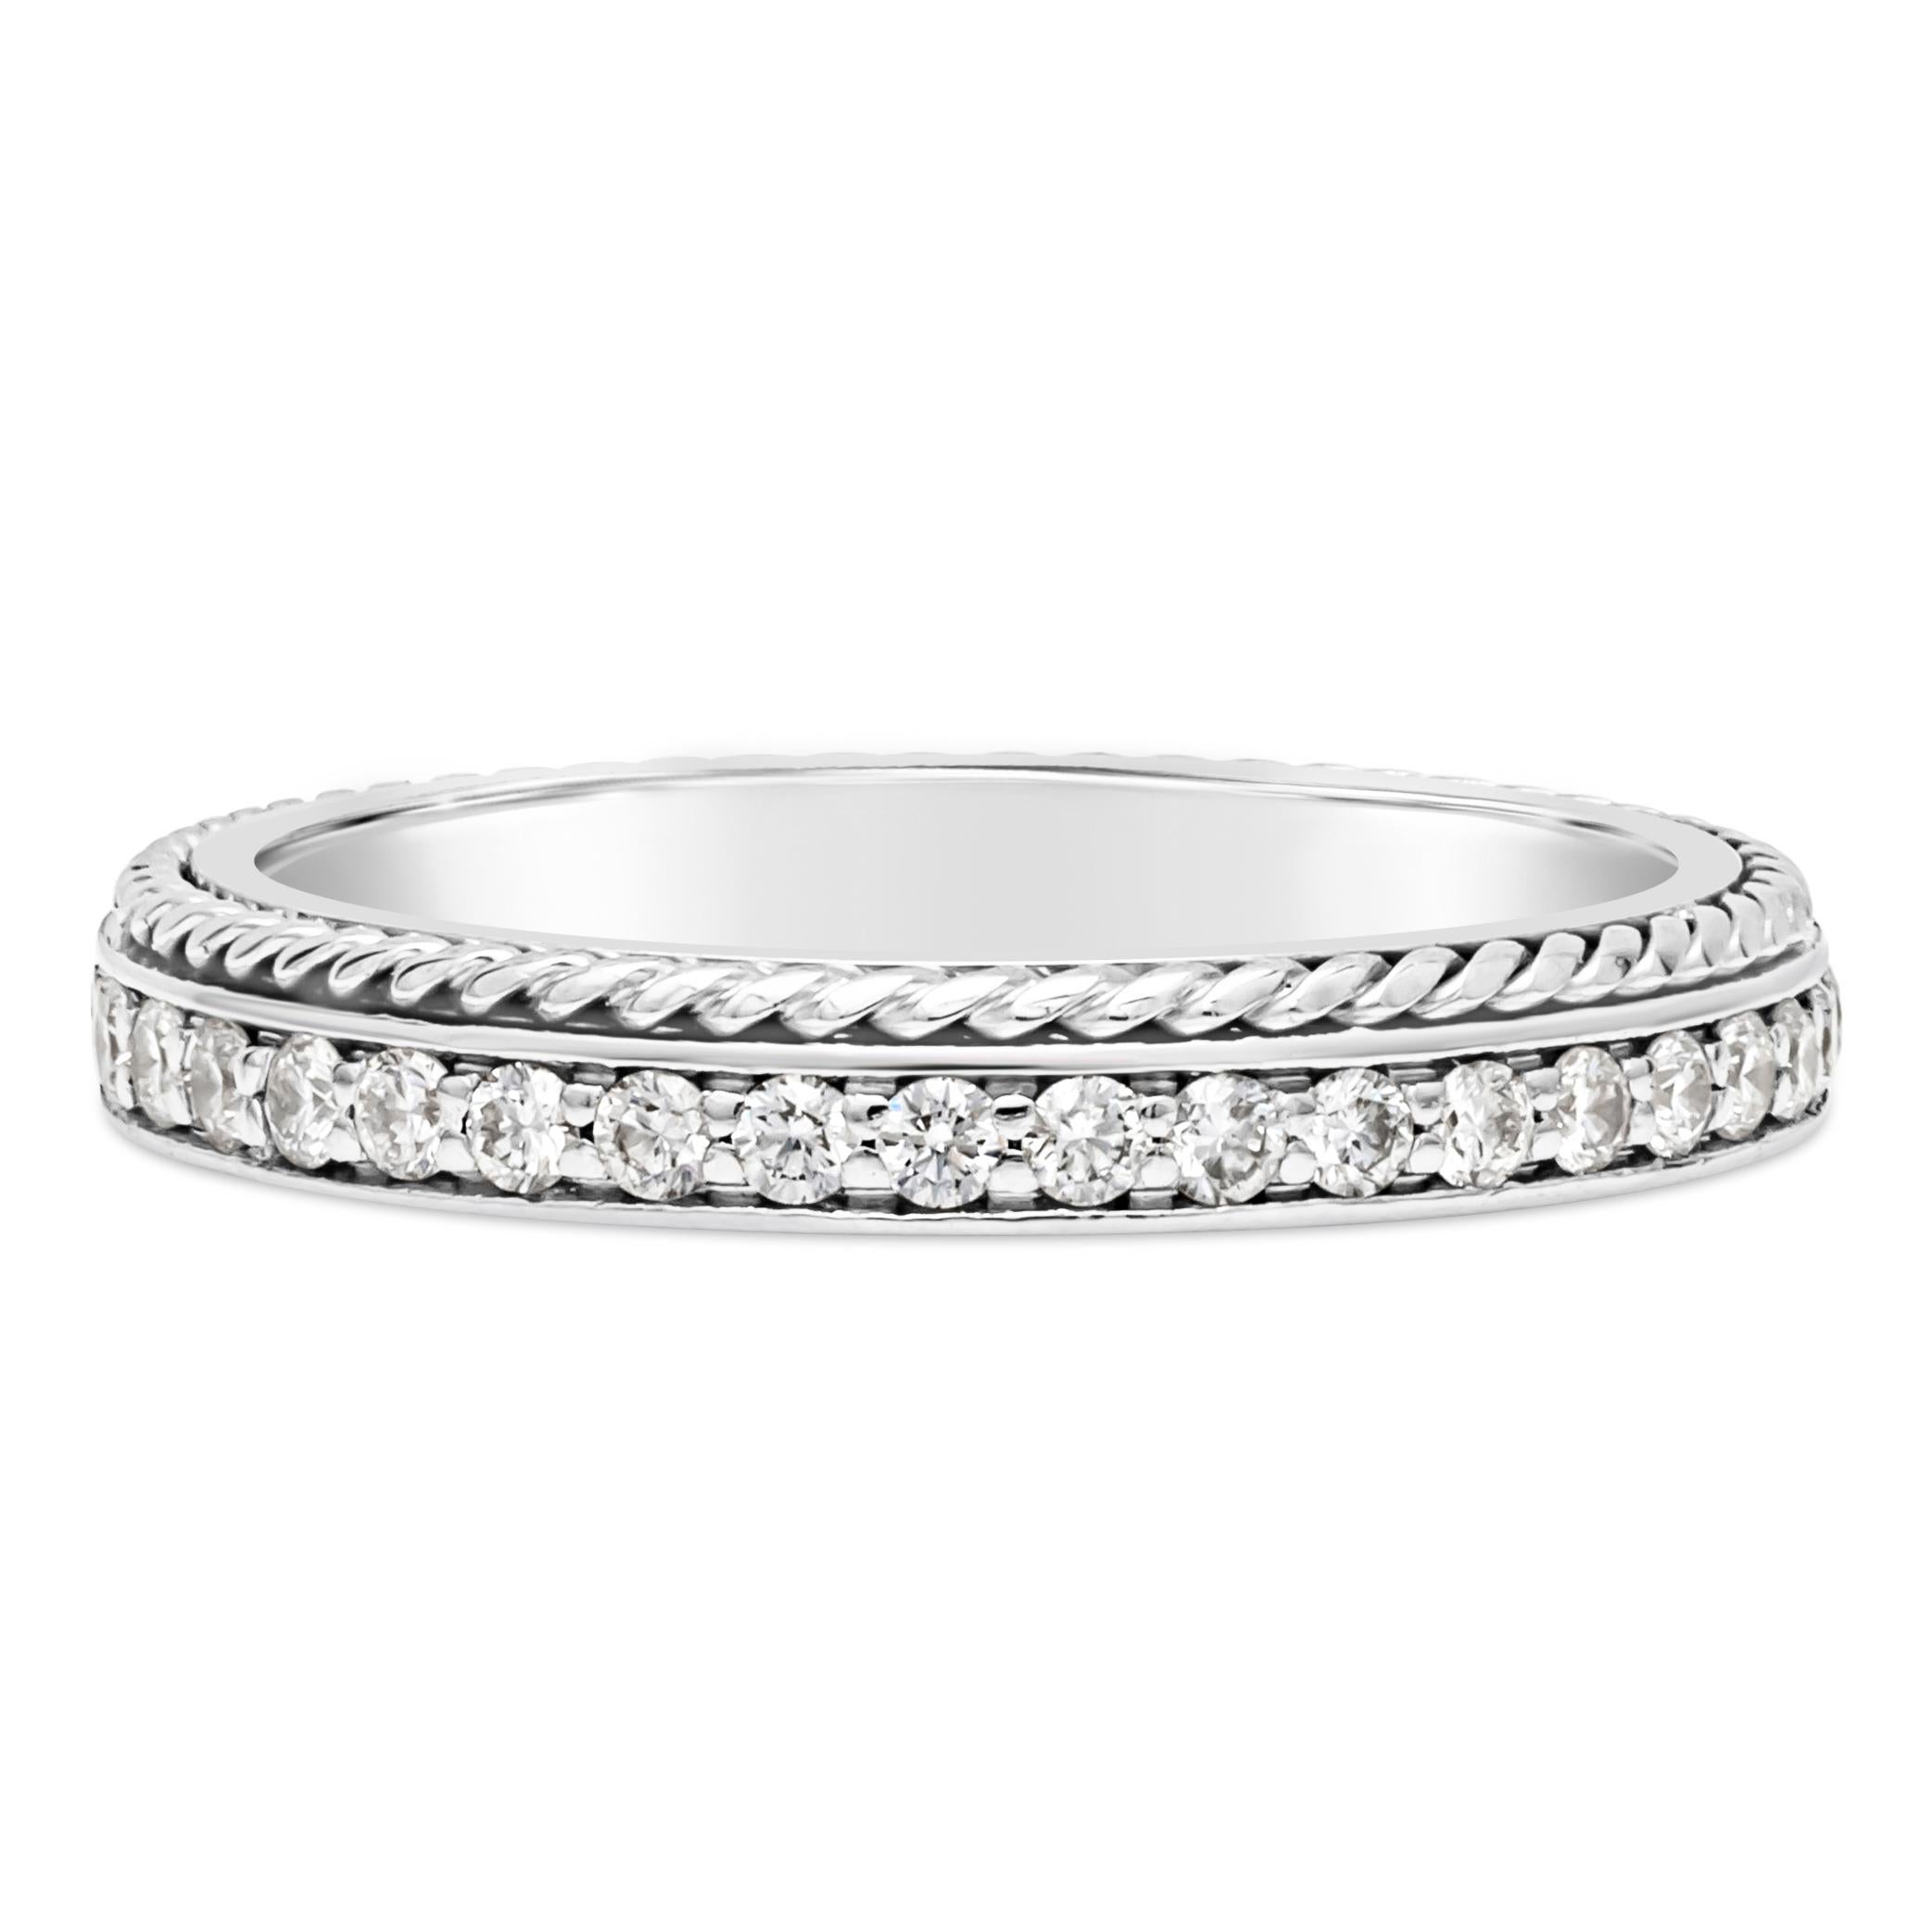 This channel set wedding band ring embellished with dazzling 37 round brilliant diamonds weighing 0.65 carats total, F color and VS-SI in clarity. Set in a bright cut with braid on one side of the ring for an elegant and antique finish. Made with